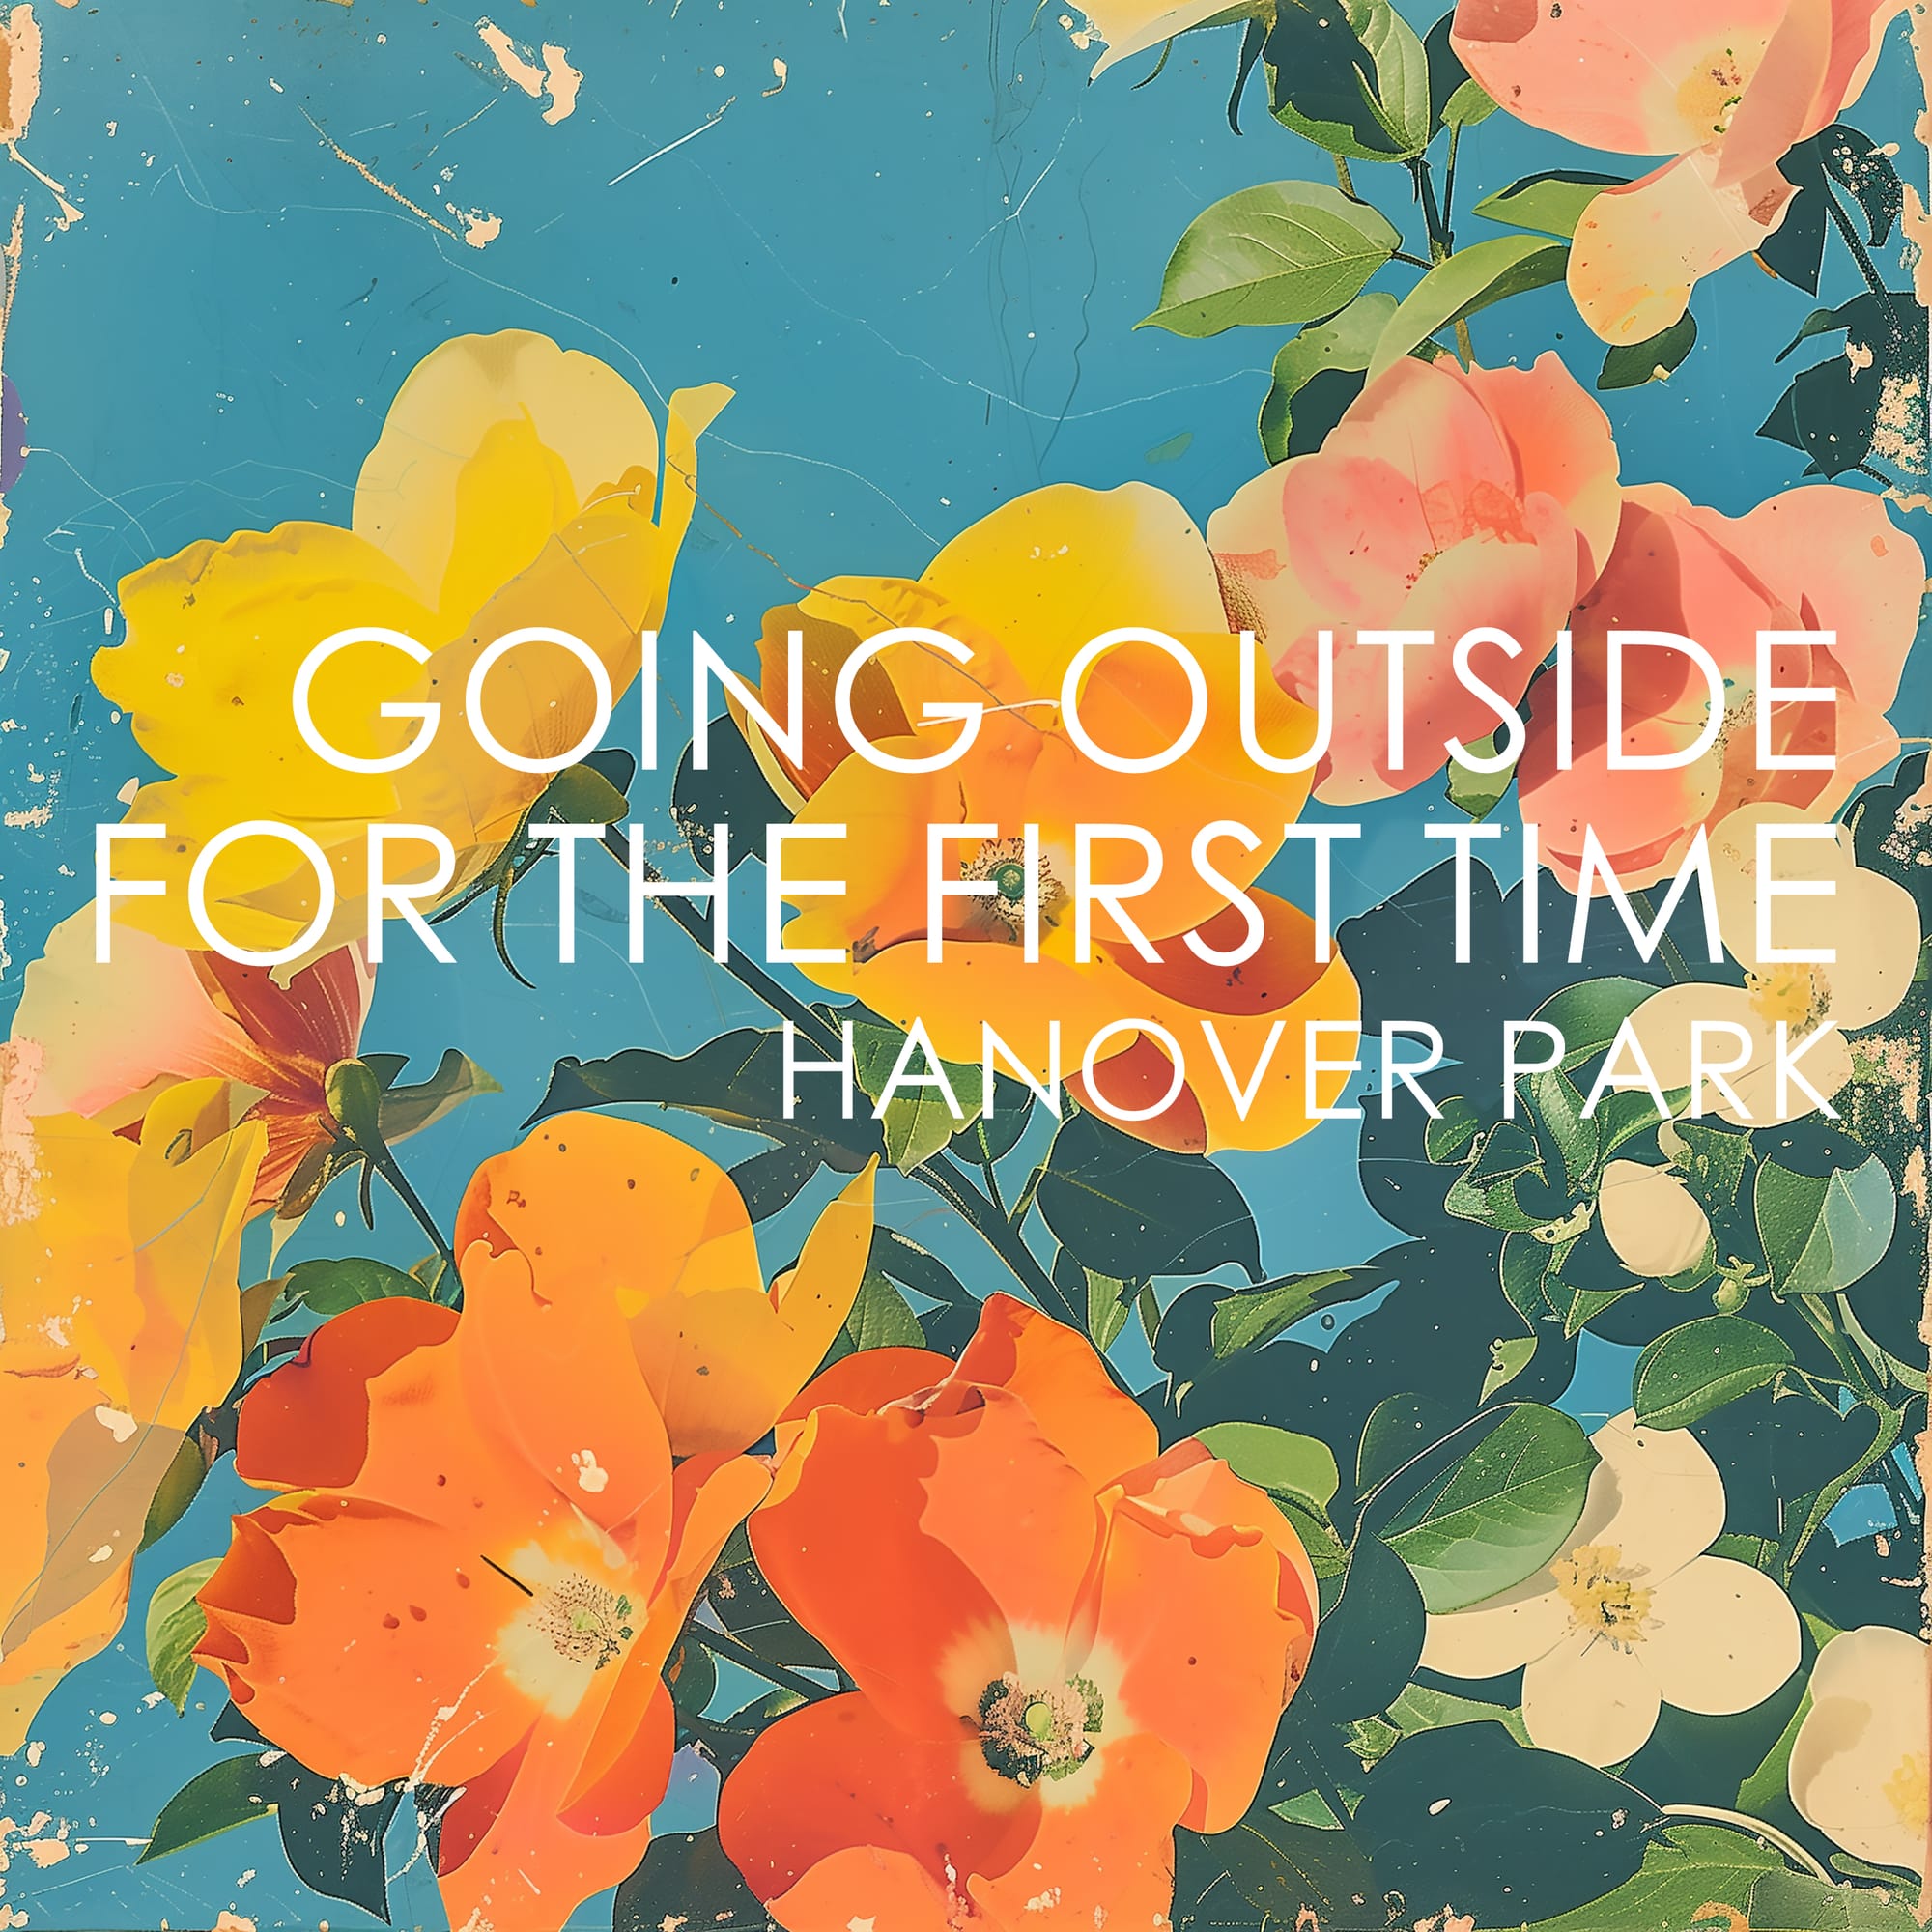 "Going Outside For The First Time" by Hanover Park